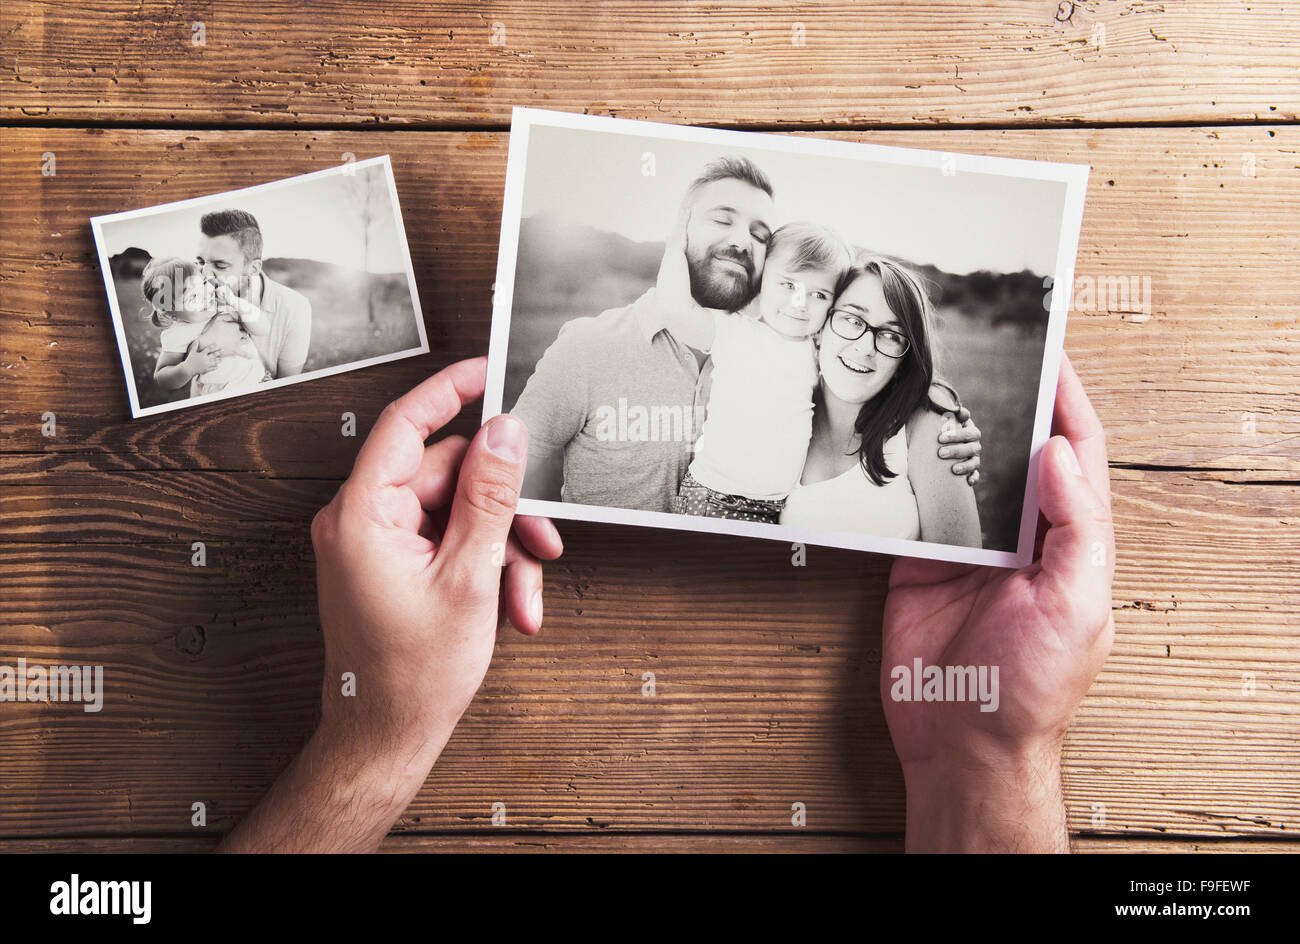 Black and white family photos laid on a table. Studio shot on wooden background. Stock Photo